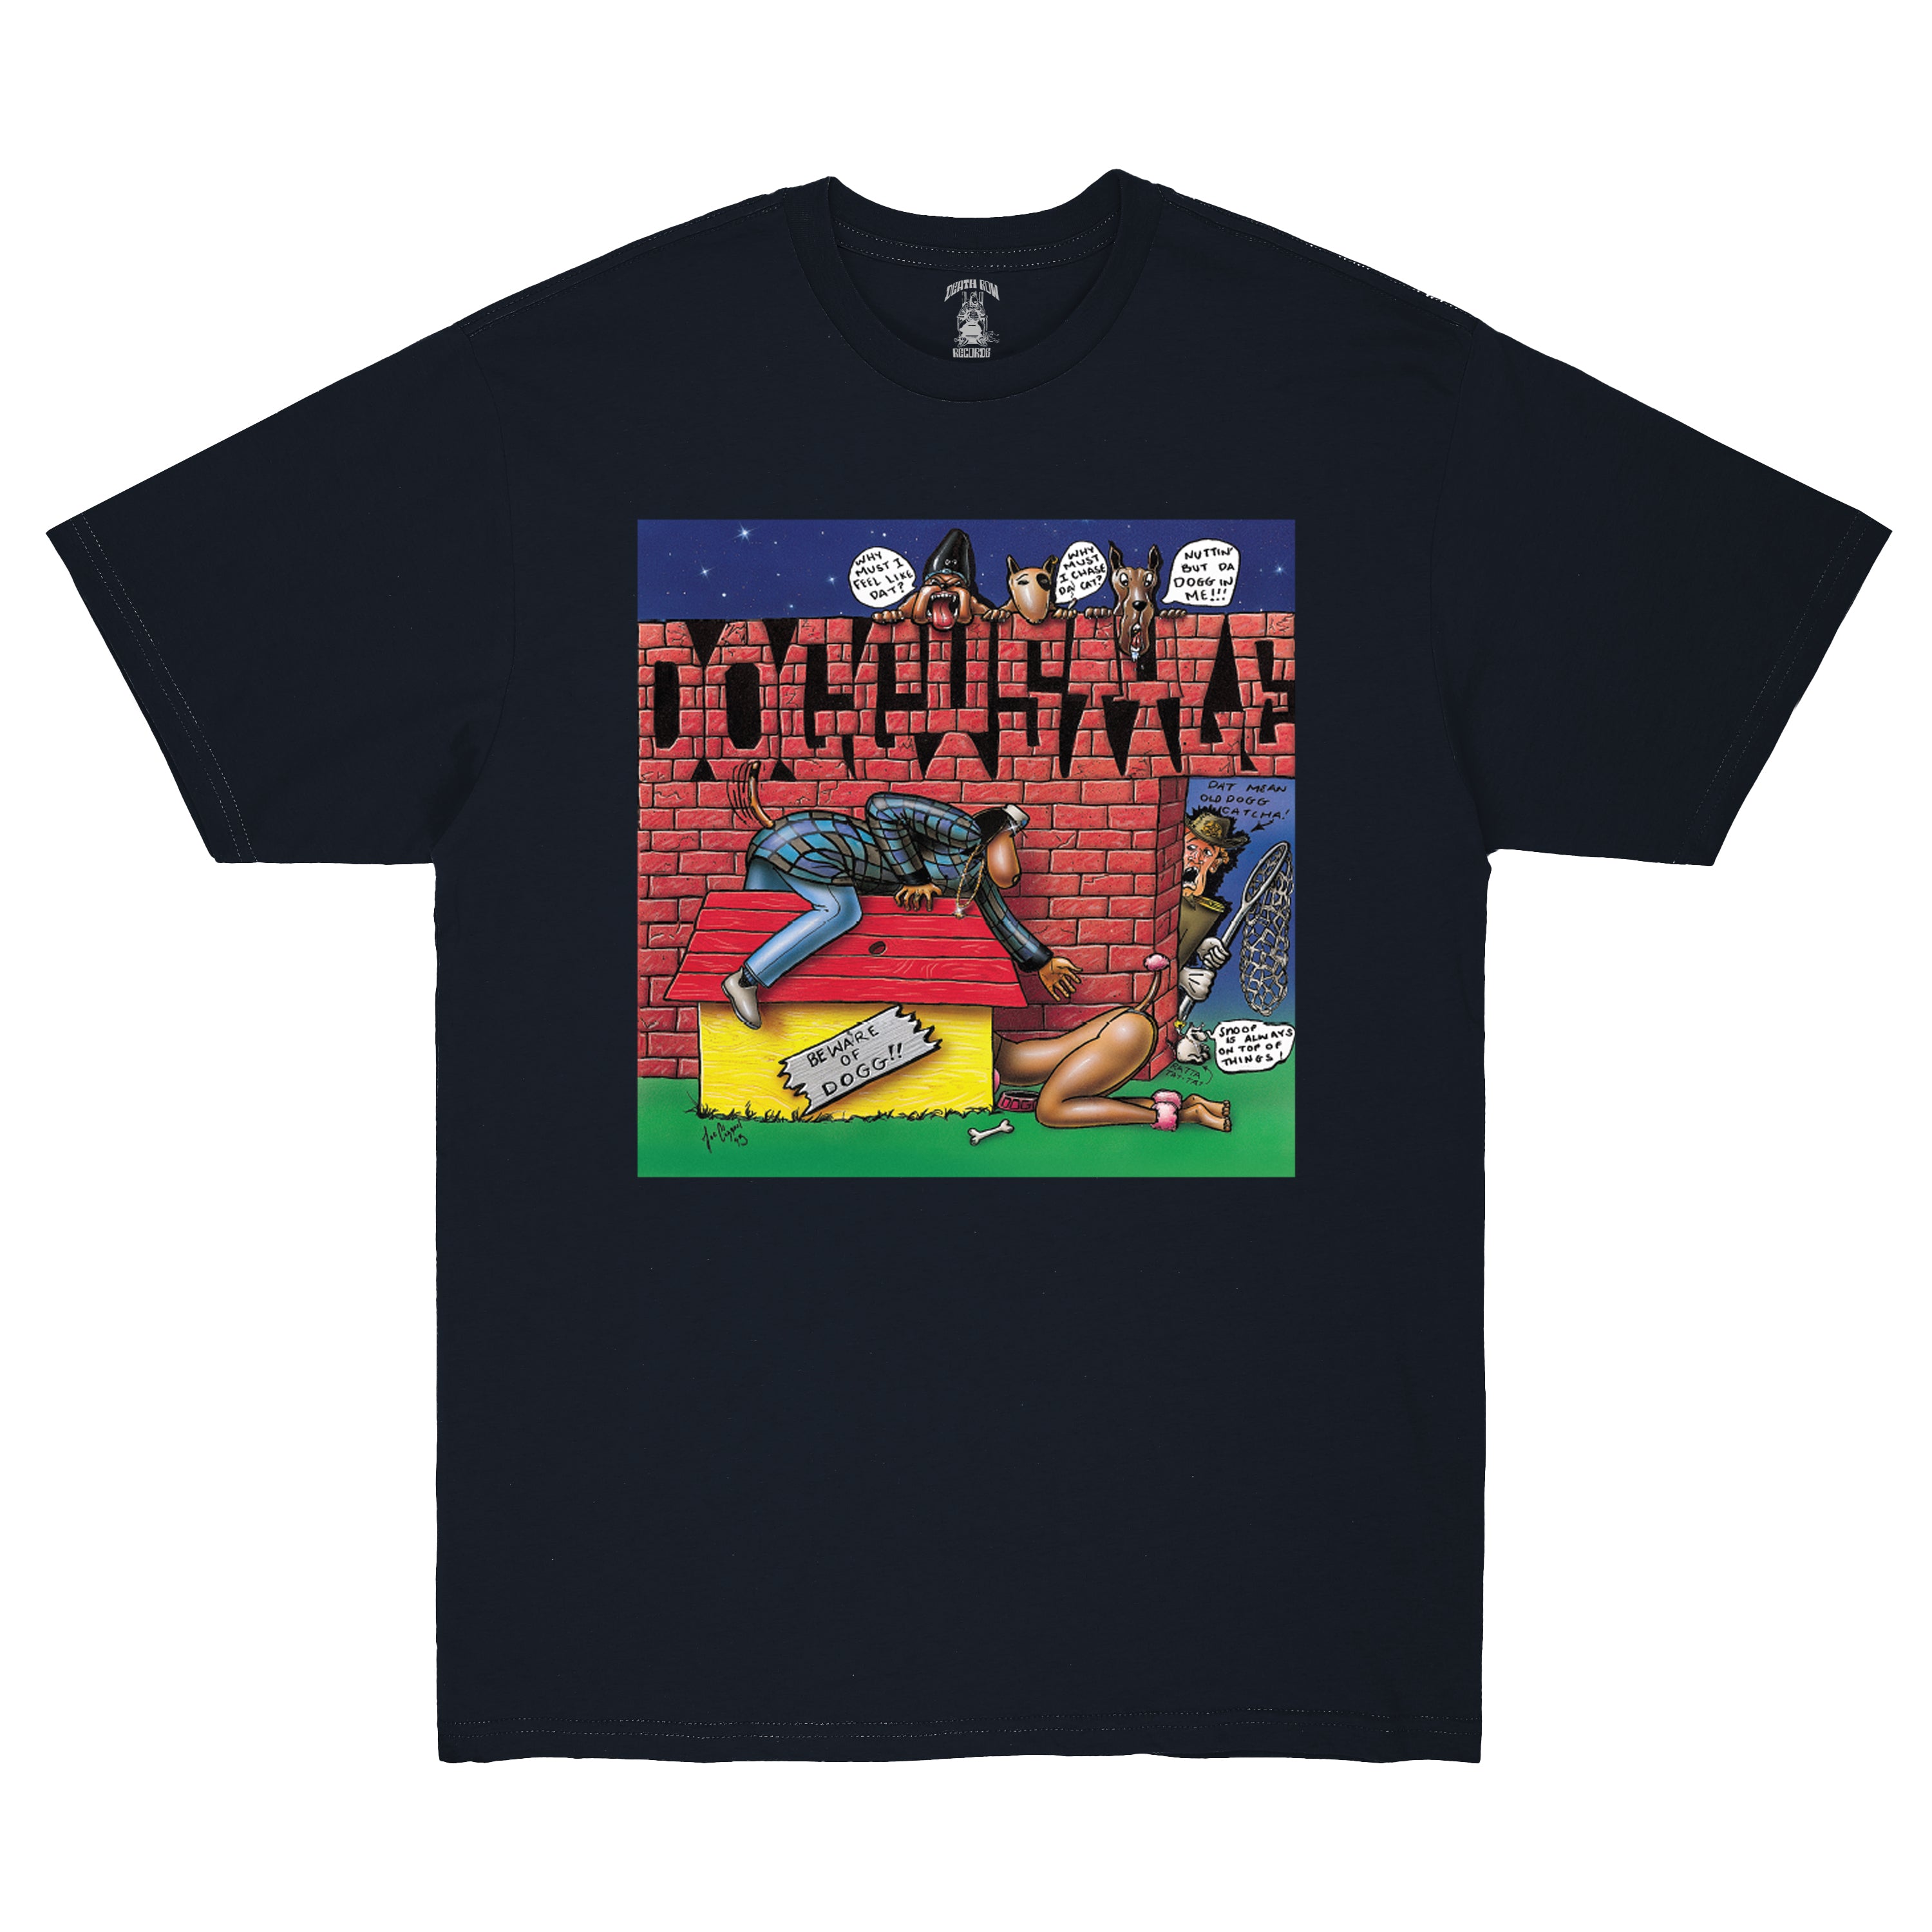 Doggystyle Album Cover Tee